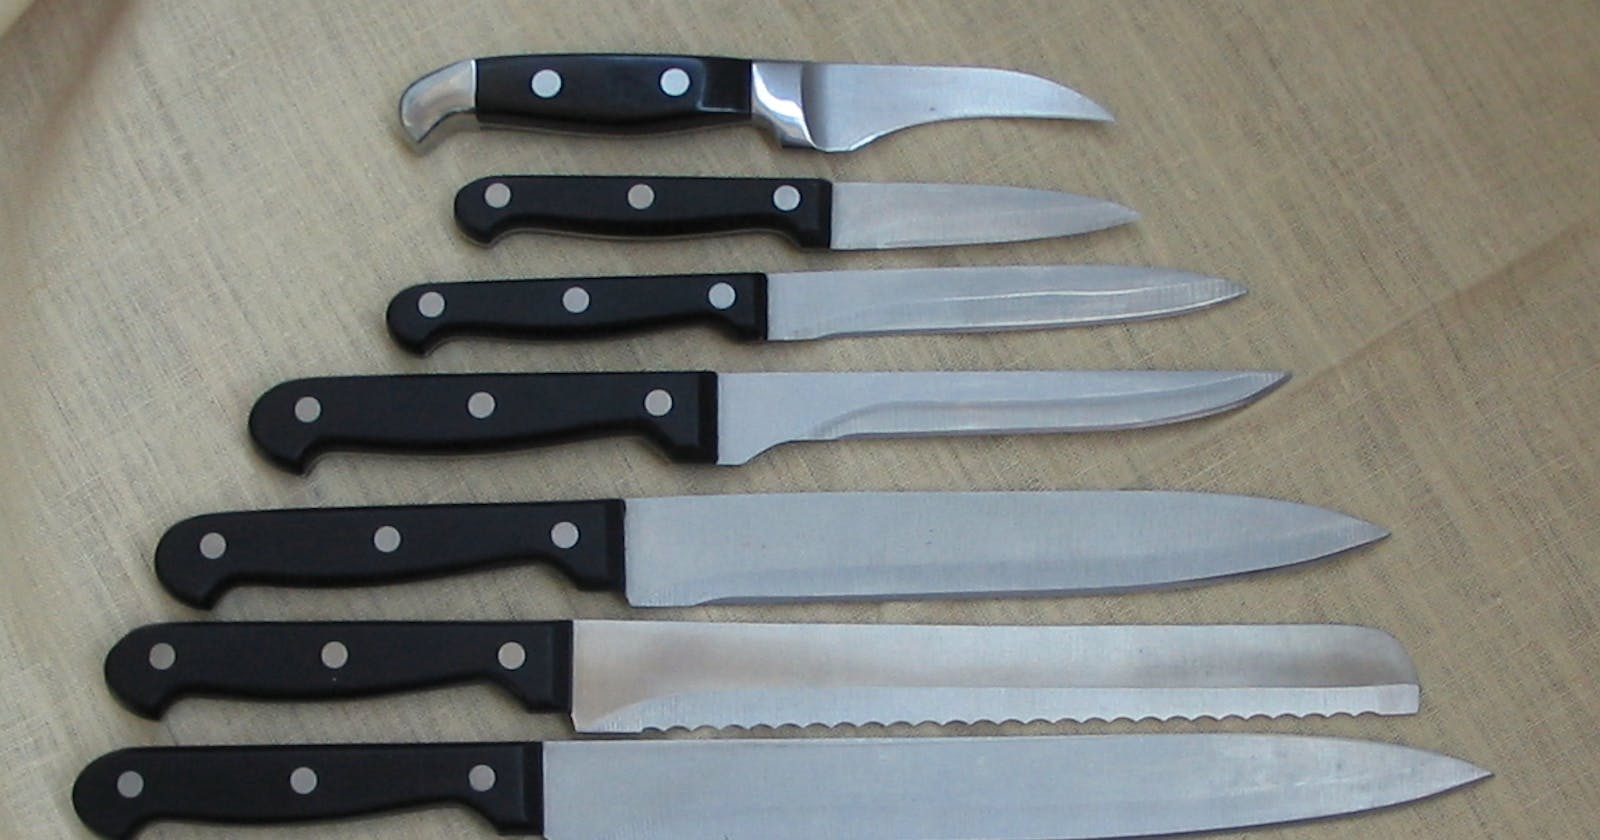 Global Kitchen Knives Market Size, Share, Growth, and Forecast to 2030